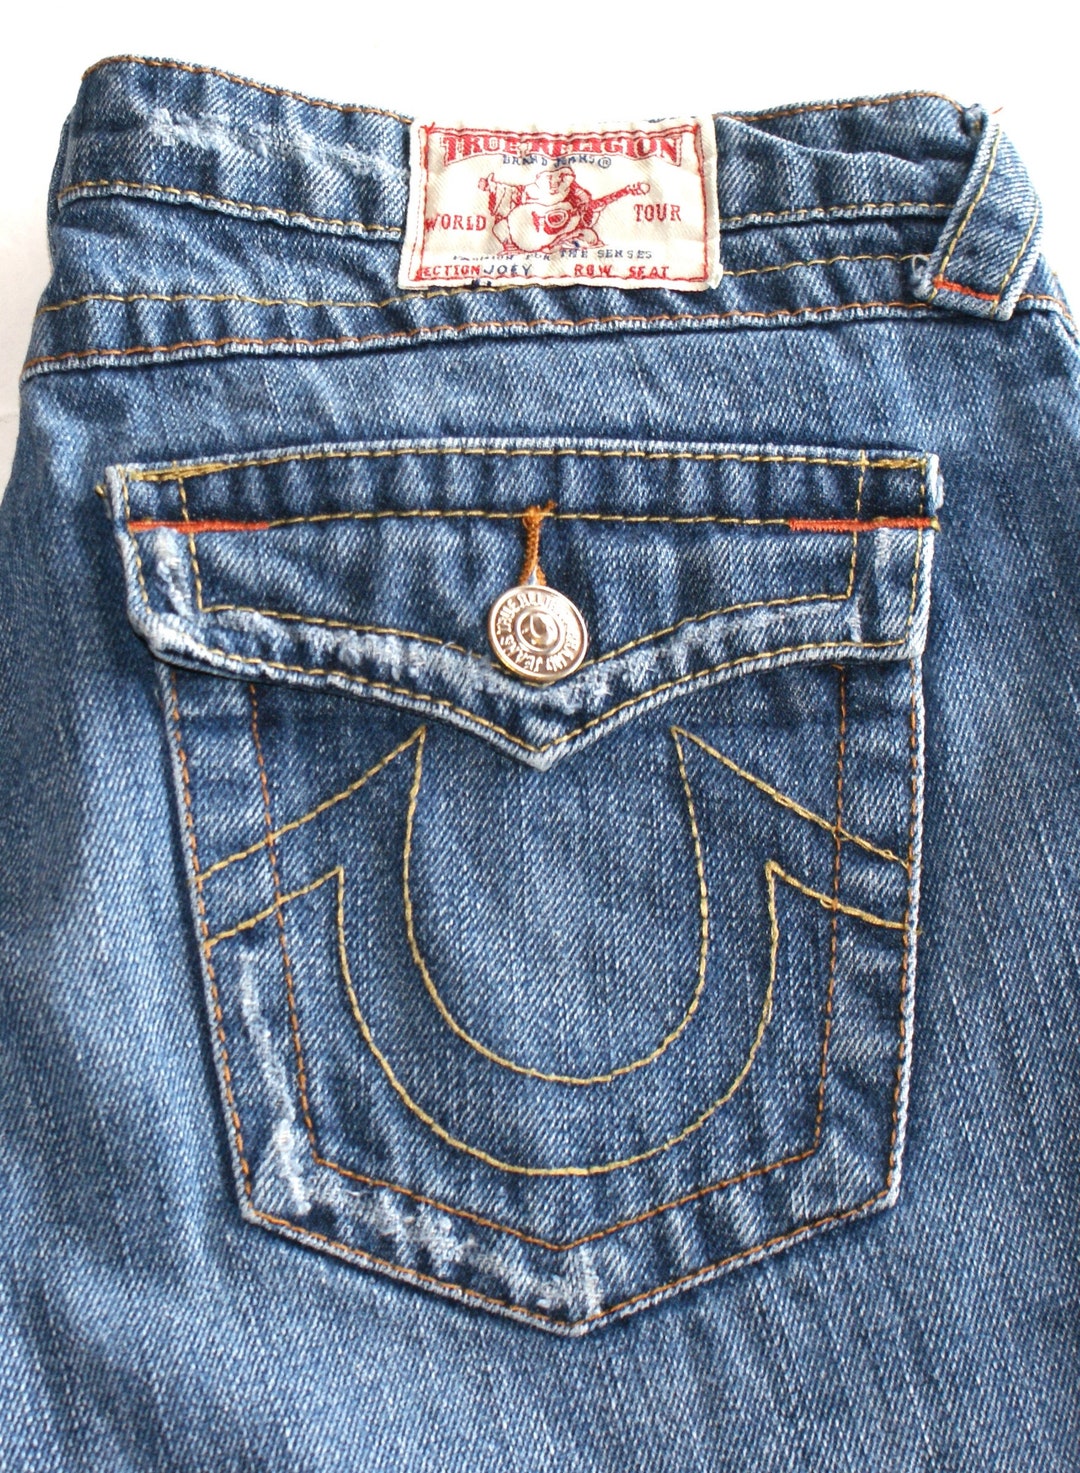 True Religion Jwans for Ladies, FACTORY DISTRESSED, W29 L32 - Etsy